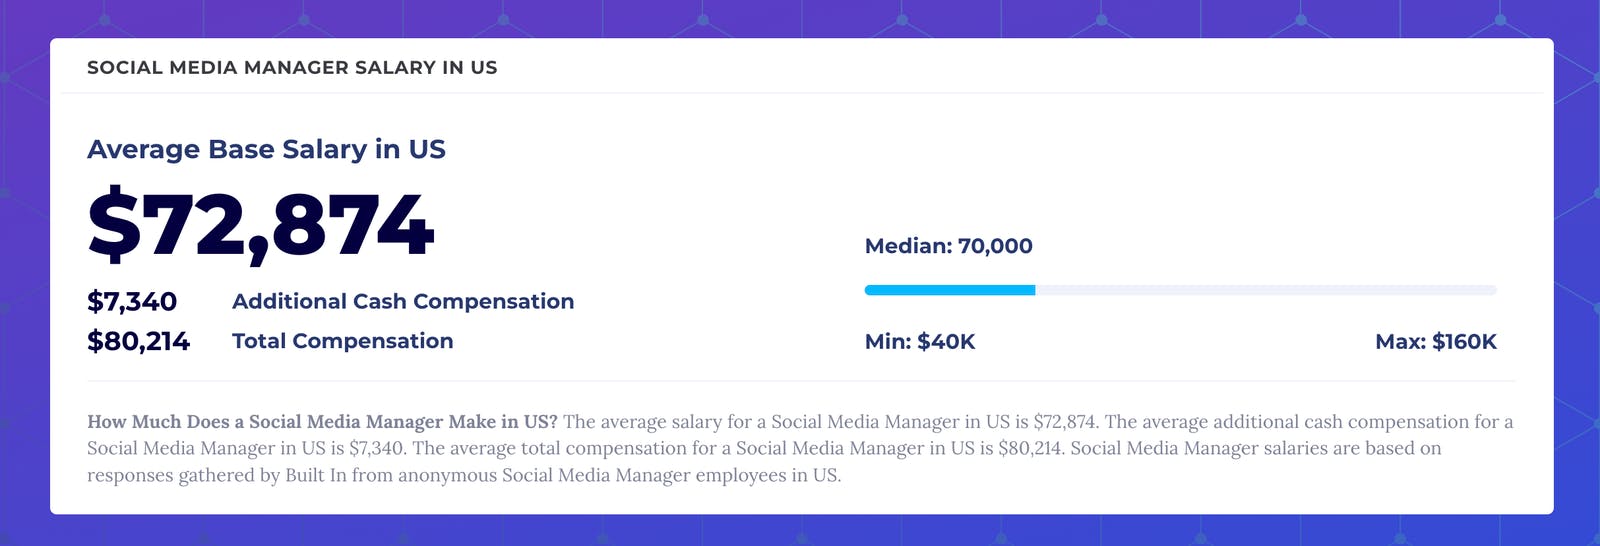 Screenshot of social media manager salary in the US from BuiltIn